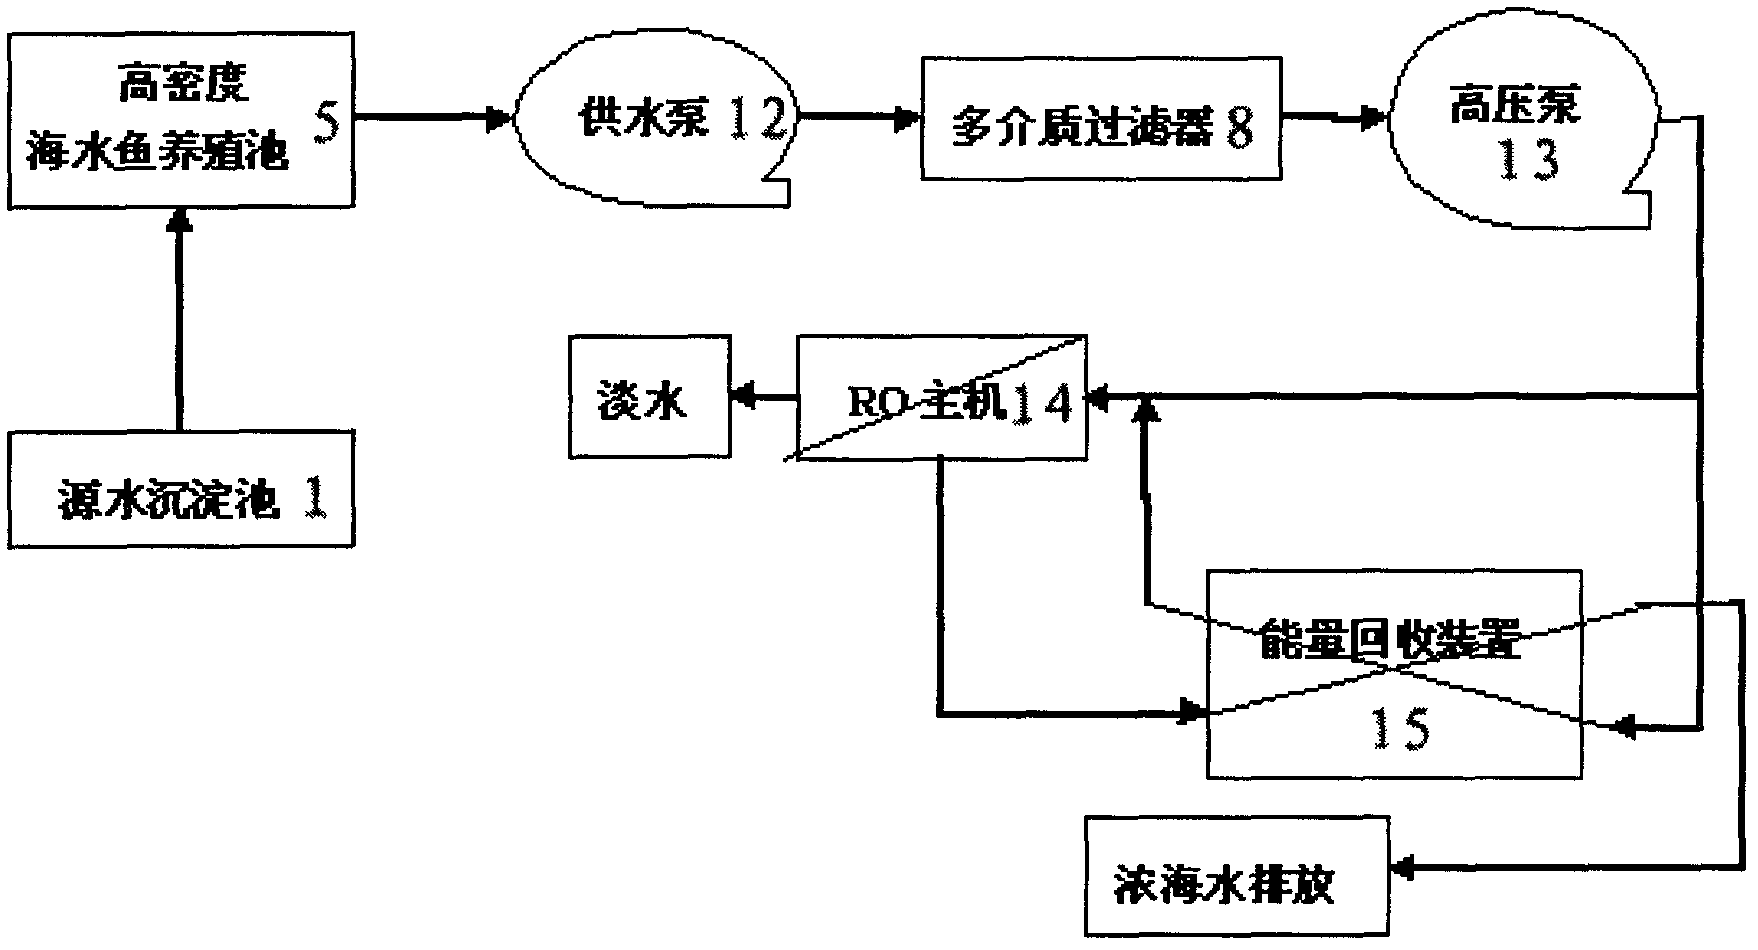 Seawater desalination process method for source water pretreatment by using biological method